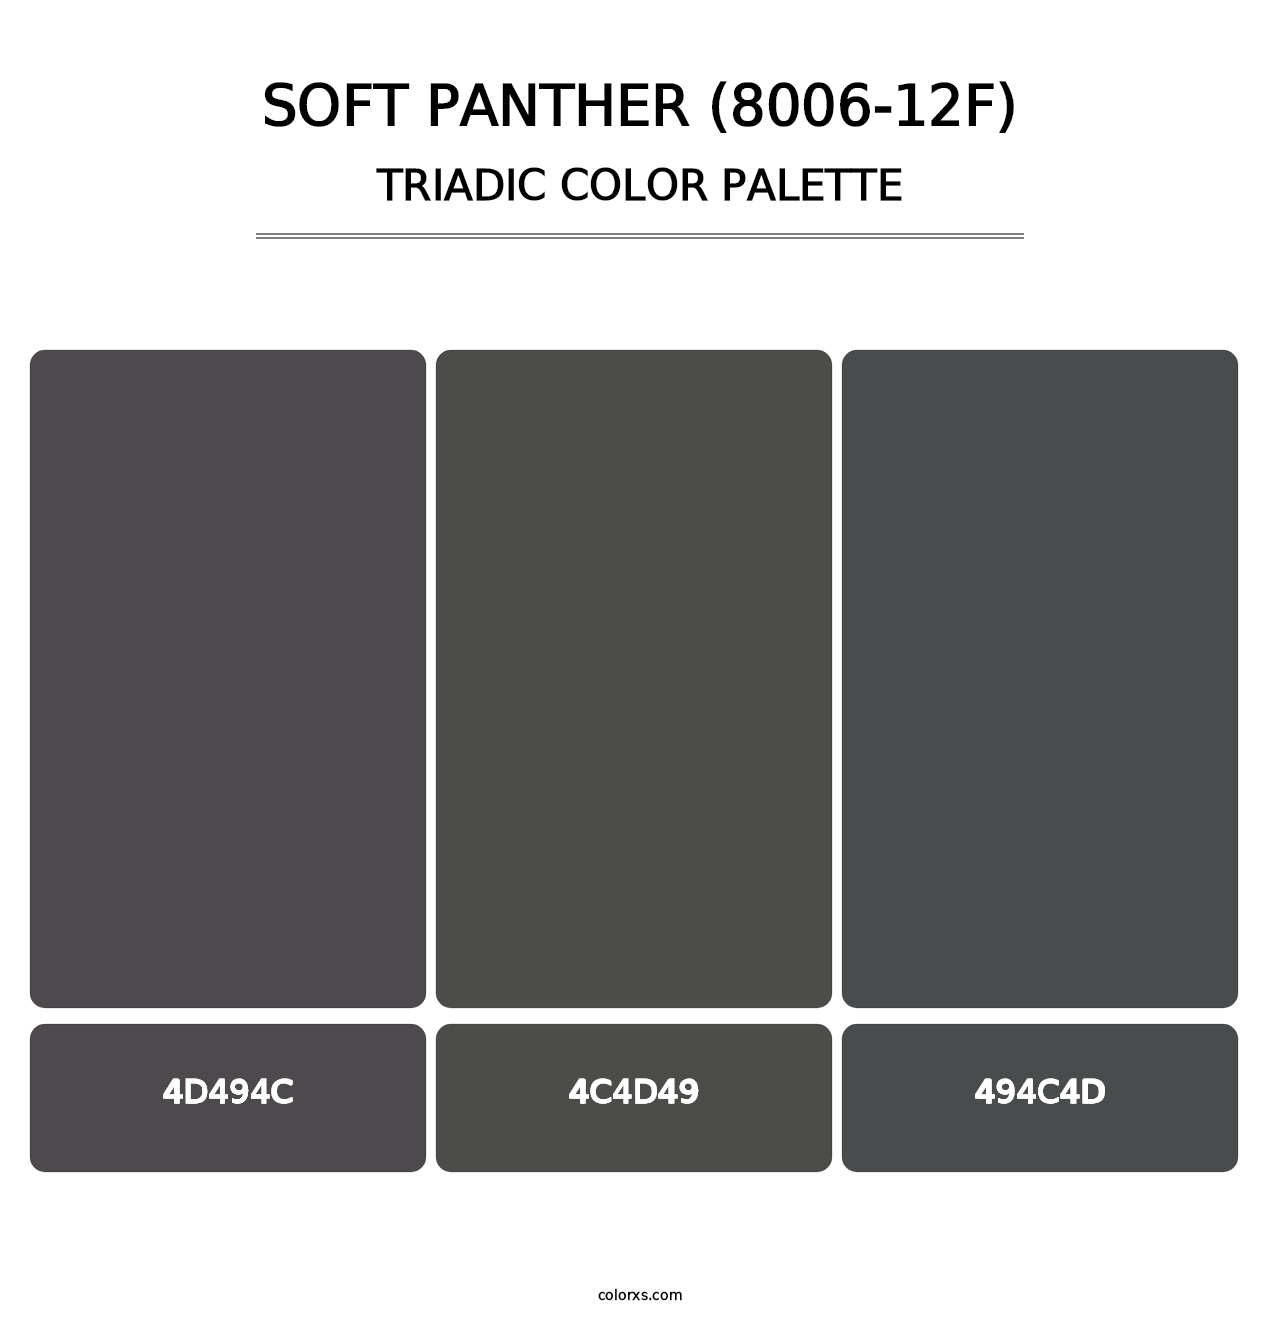 Soft Panther (8006-12F) - Triadic Color Palette